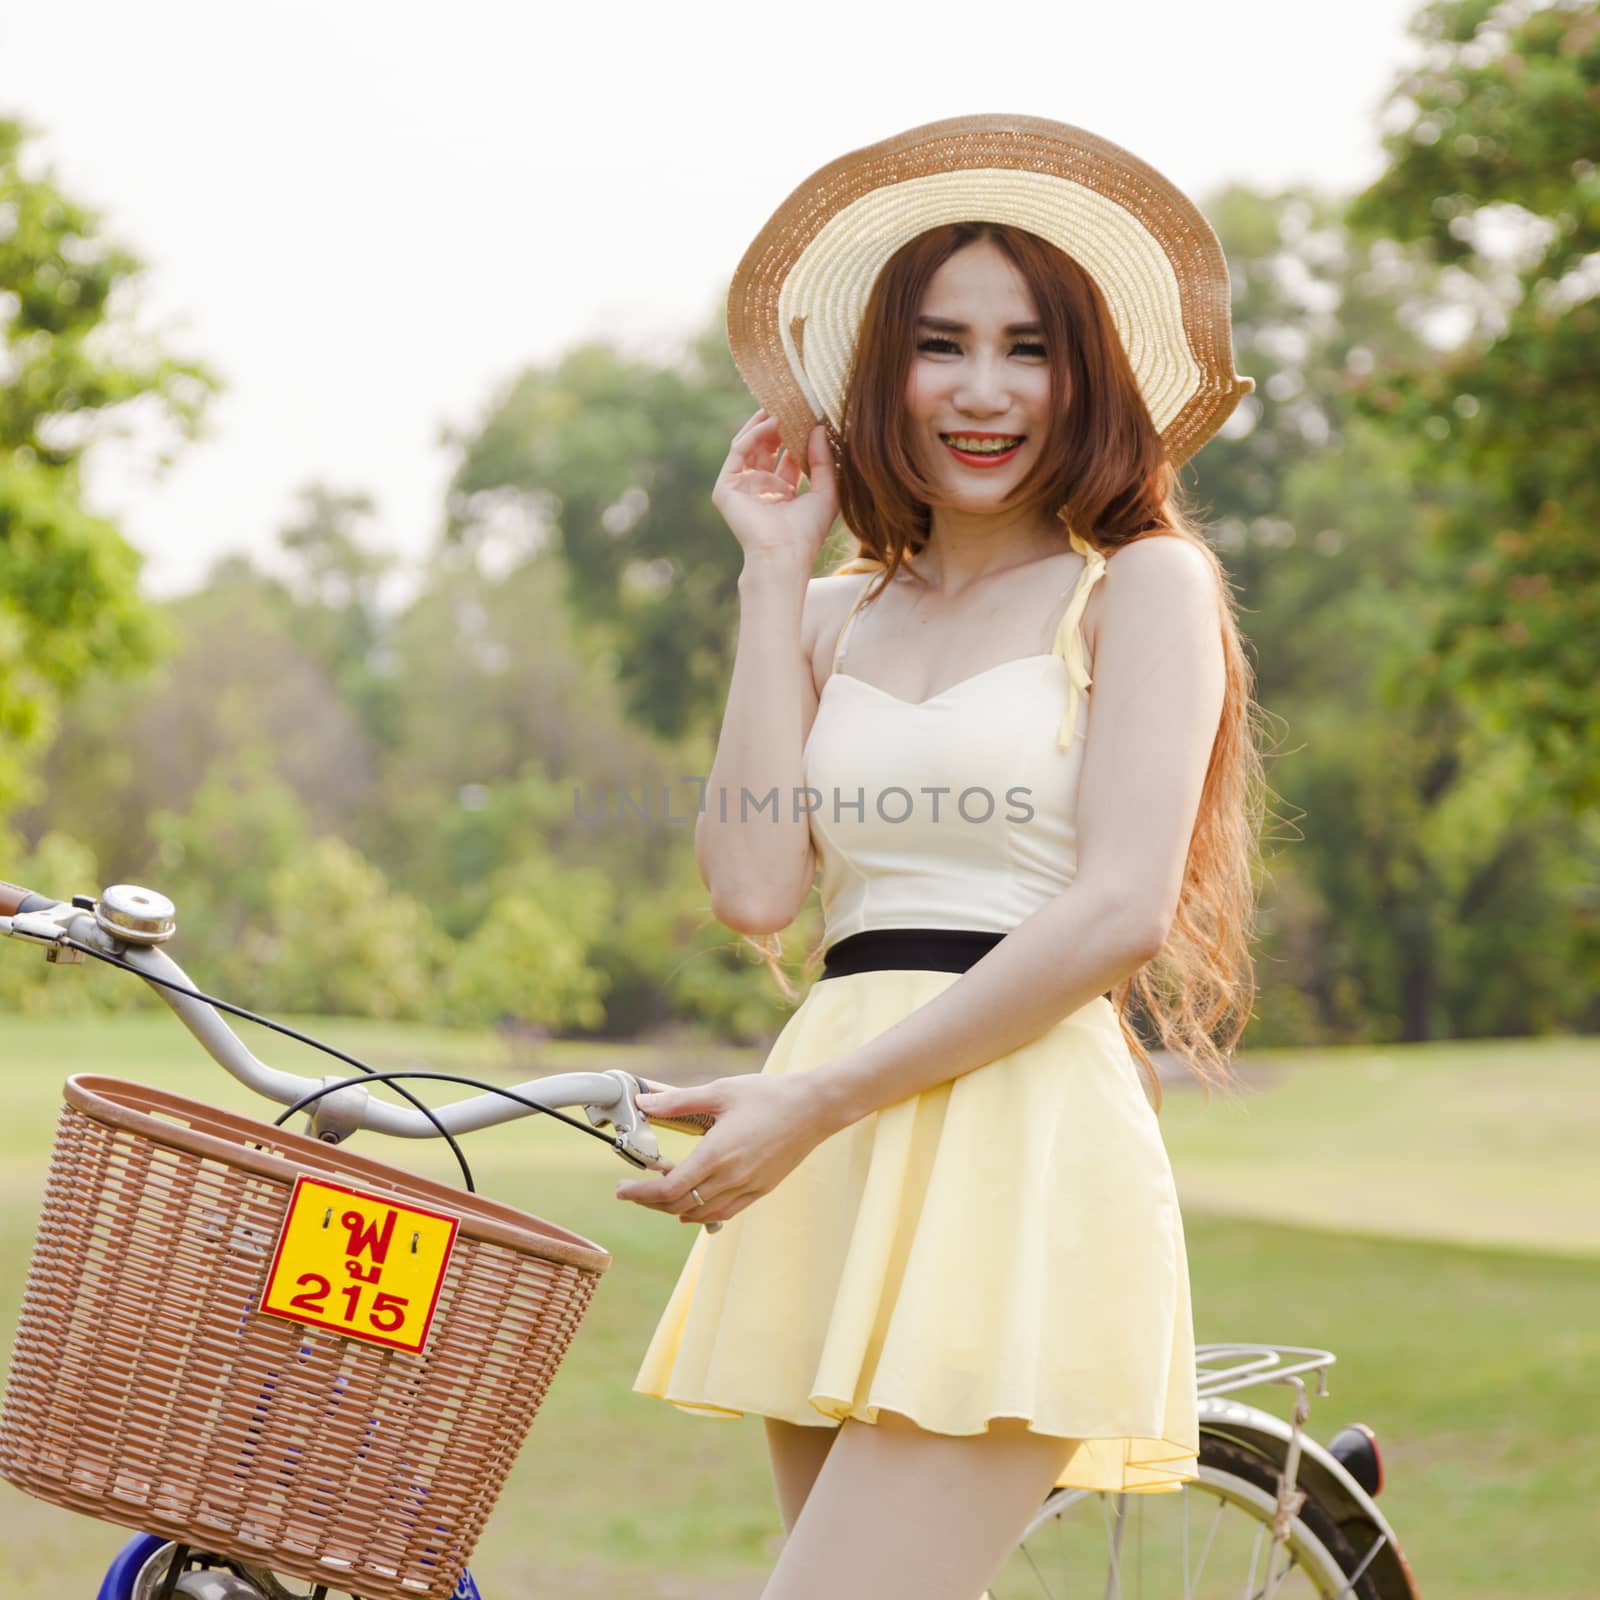 Asian woman and bikes. On the grass in the park.